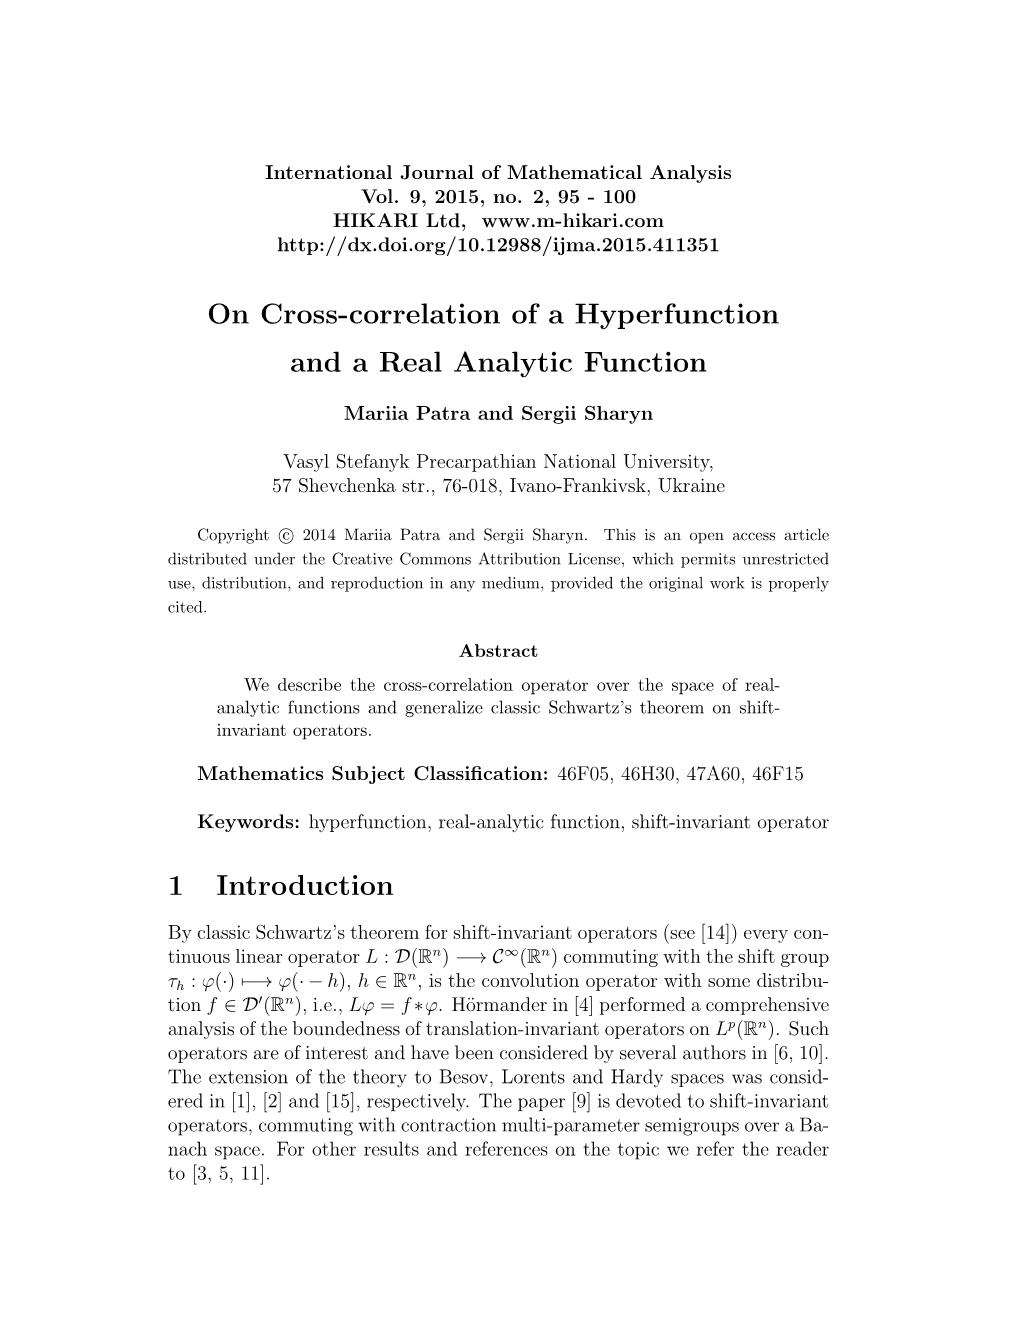 On Cross-Correlation of a Hyperfunction and a Real Analytic Function 1 Introduction